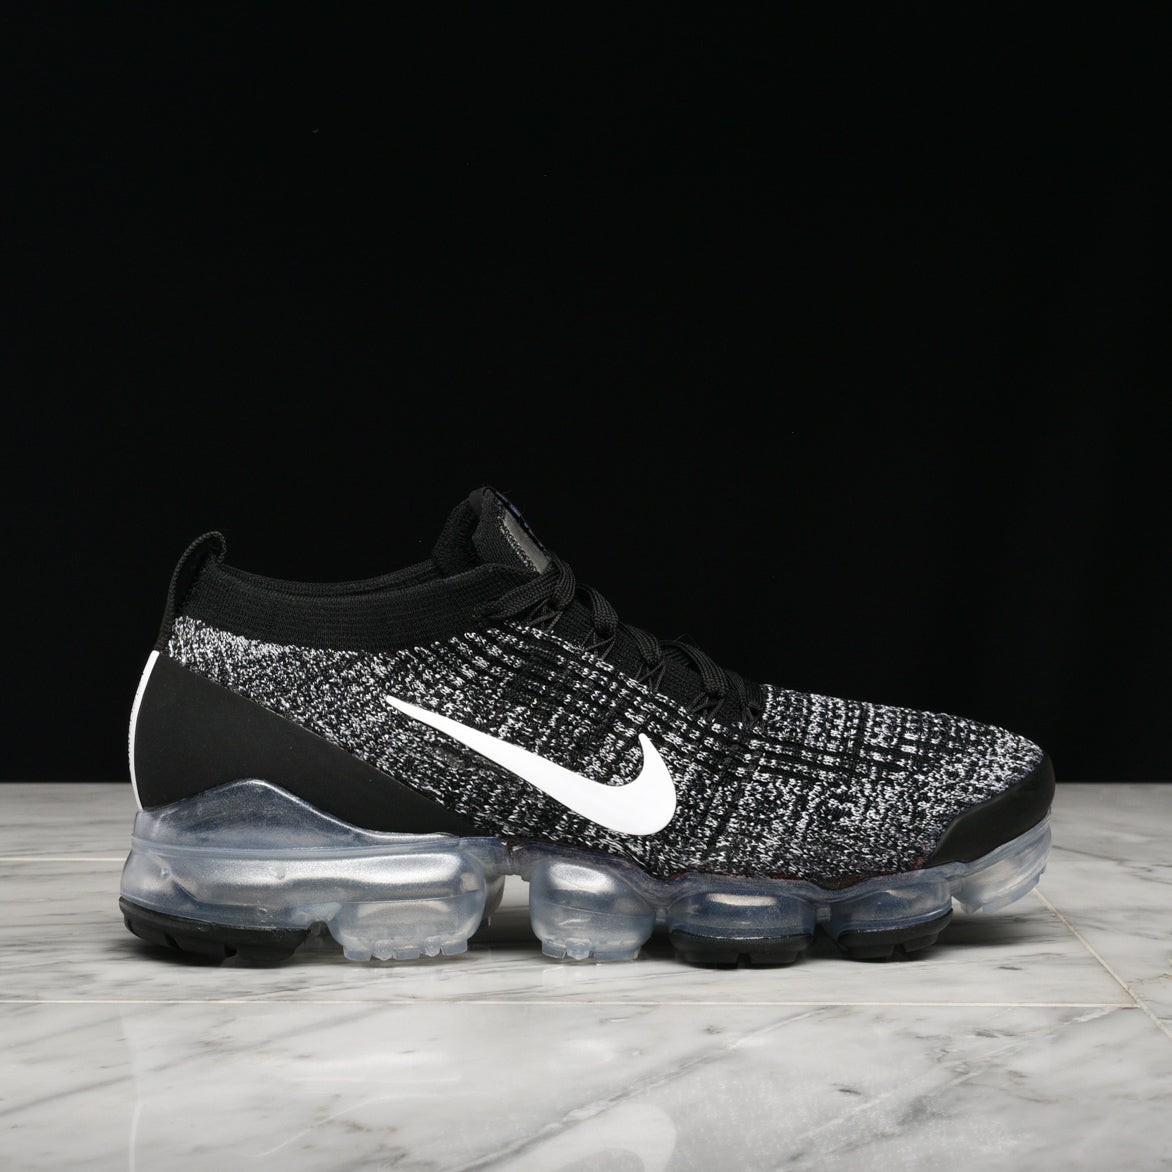 vapormax 3 black and white